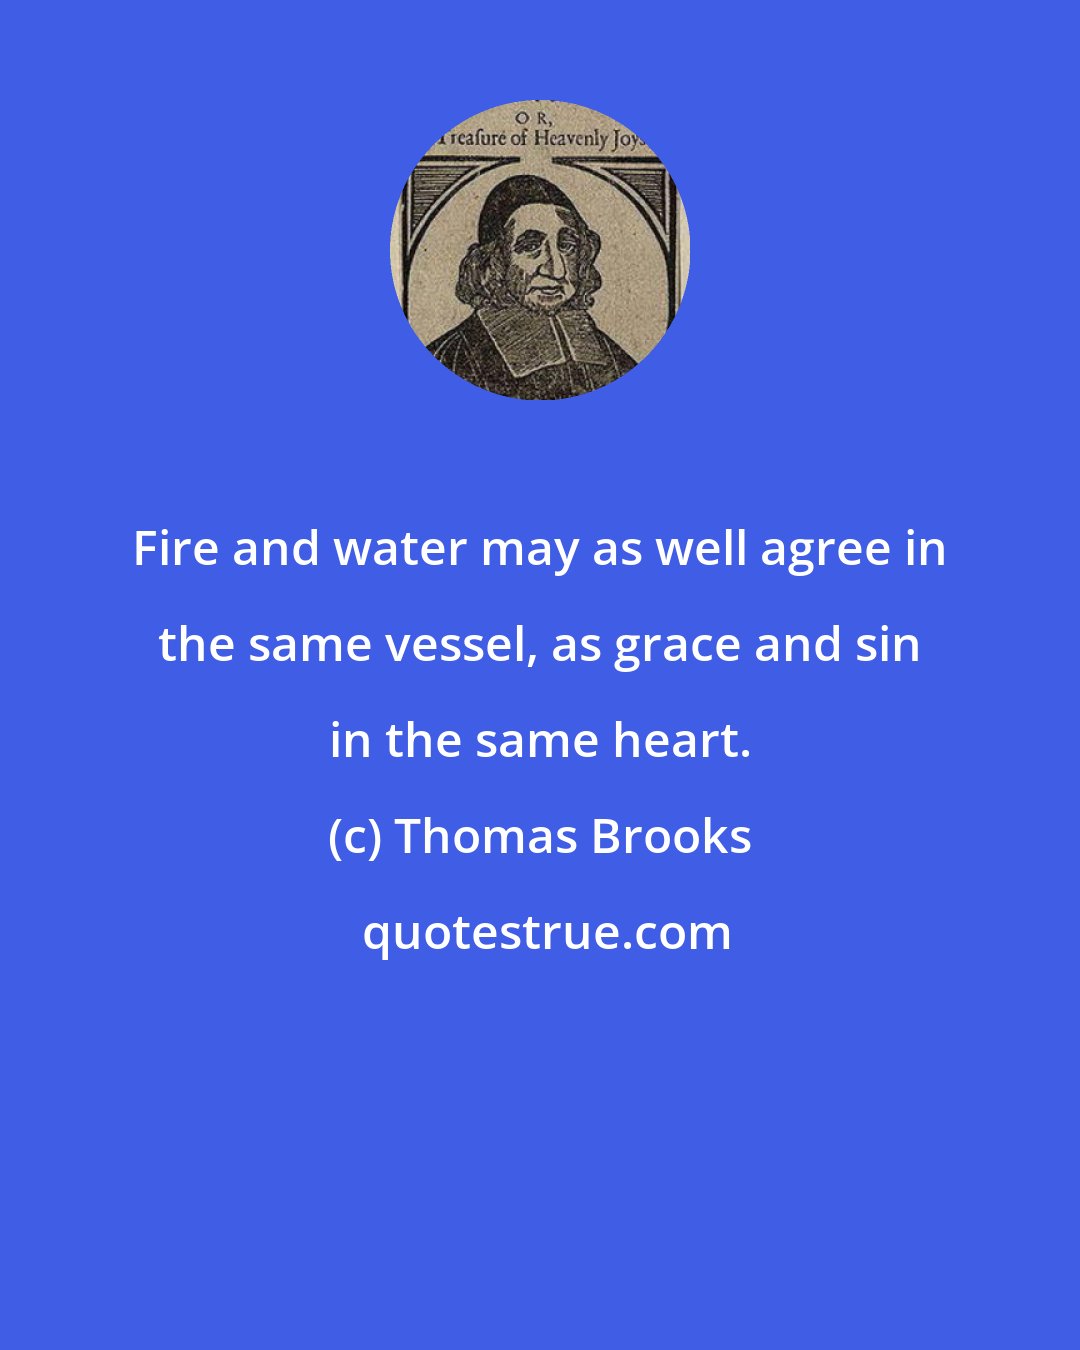 Thomas Brooks: Fire and water may as well agree in the same vessel, as grace and sin in the same heart.